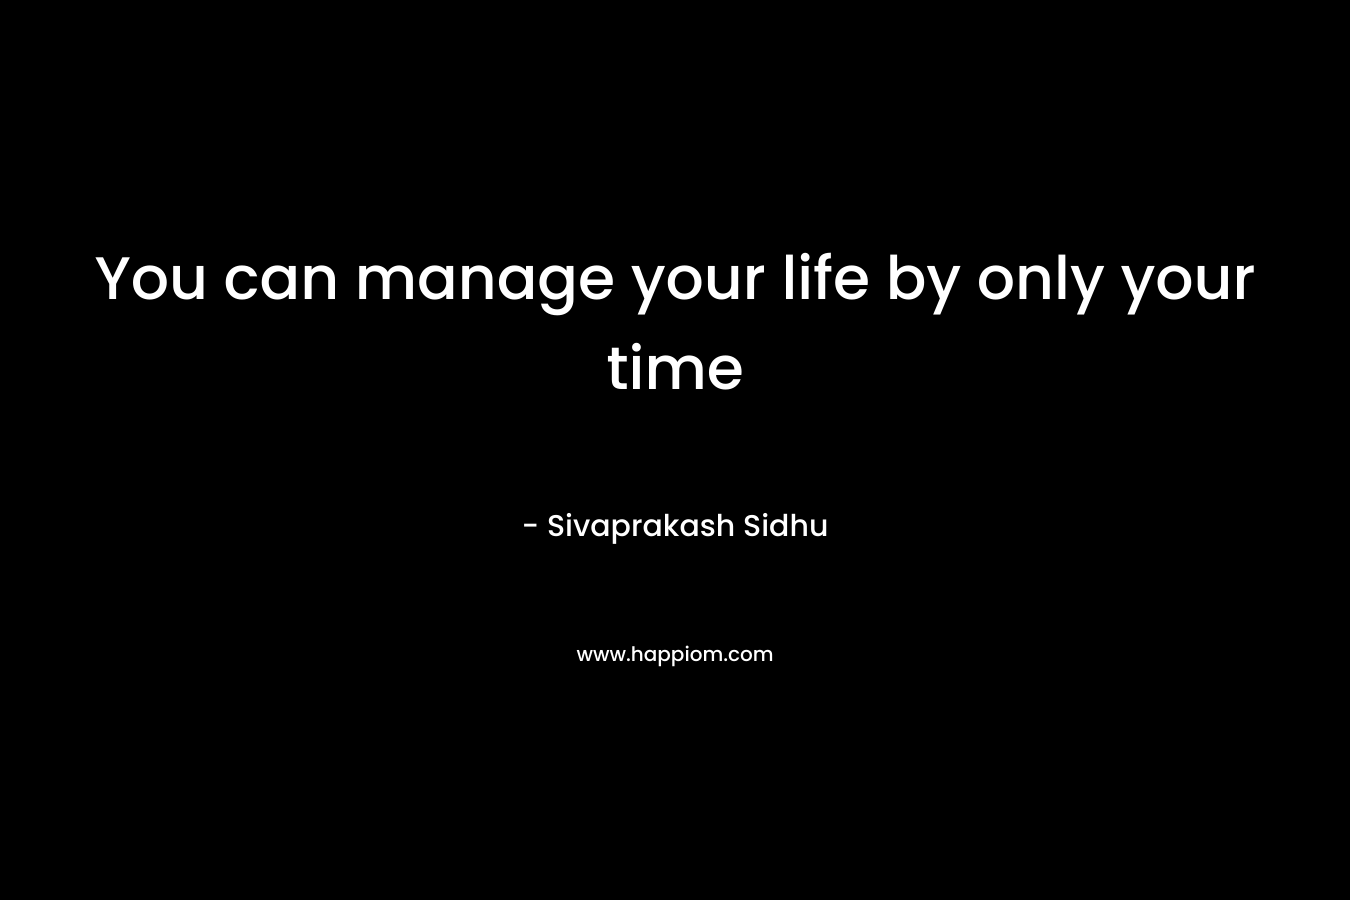 You can manage your life by only your time